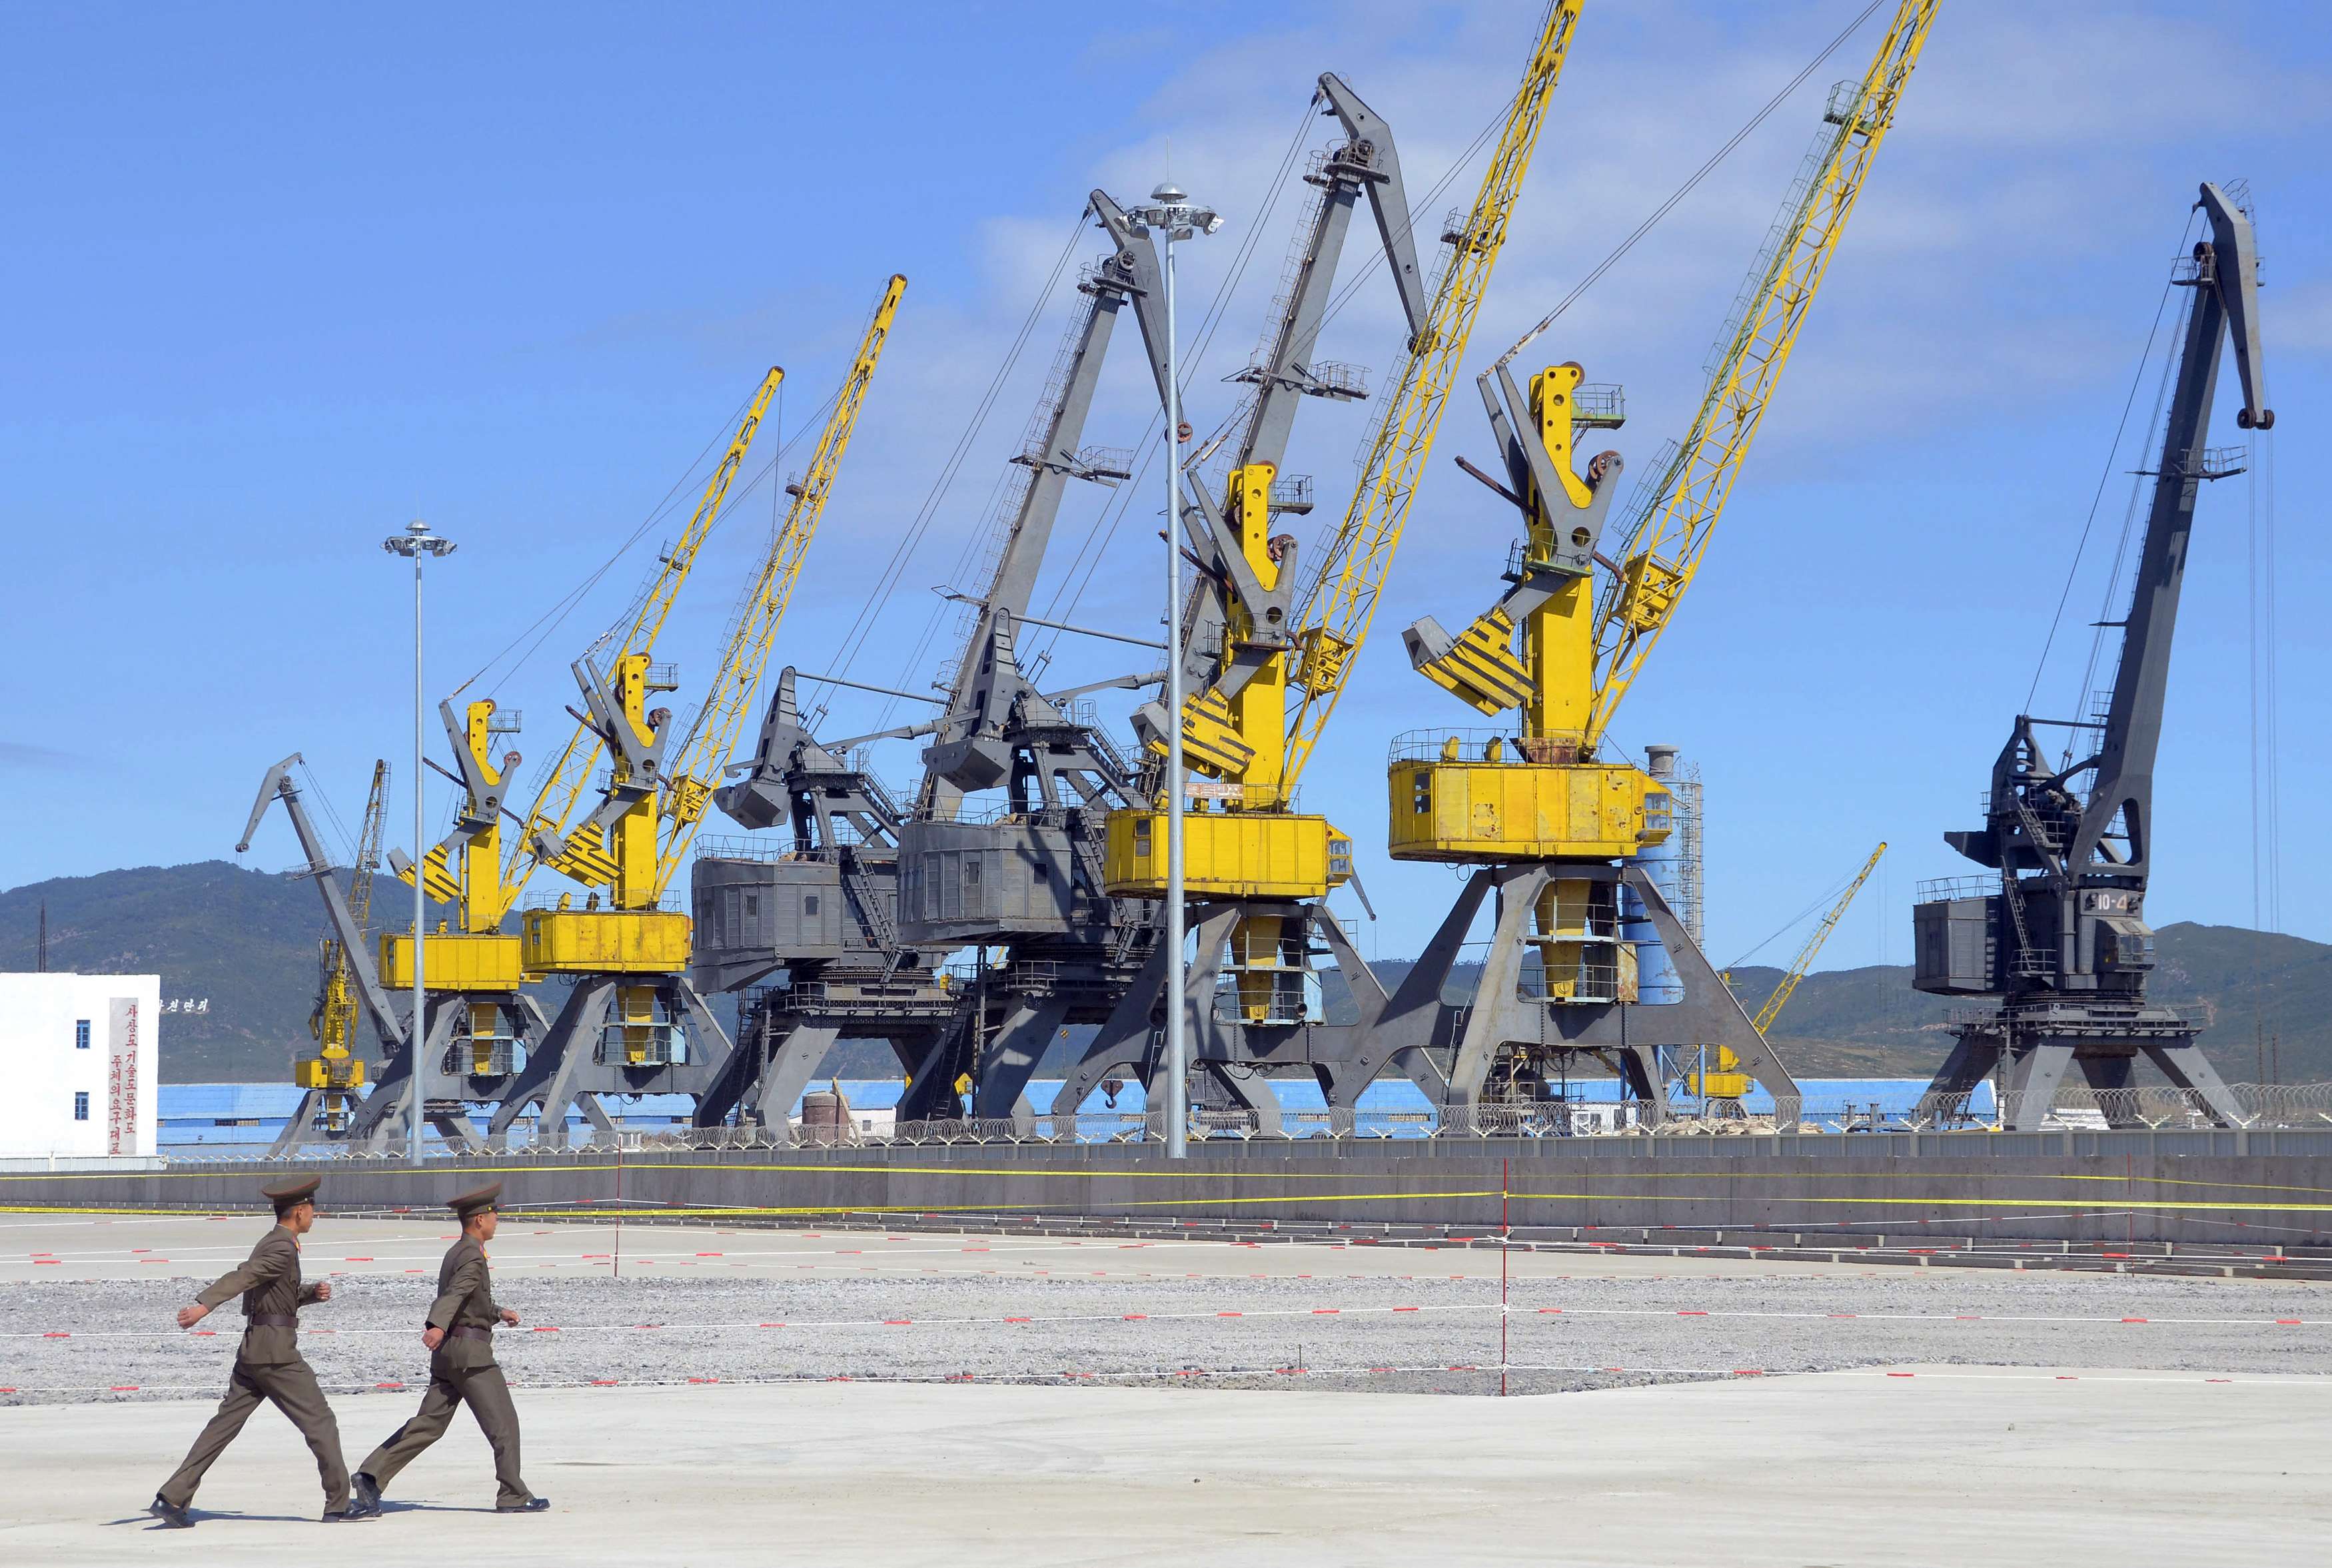 North Korean soldiers march near loading machinery at the port of Rajin. Photo: Reuters